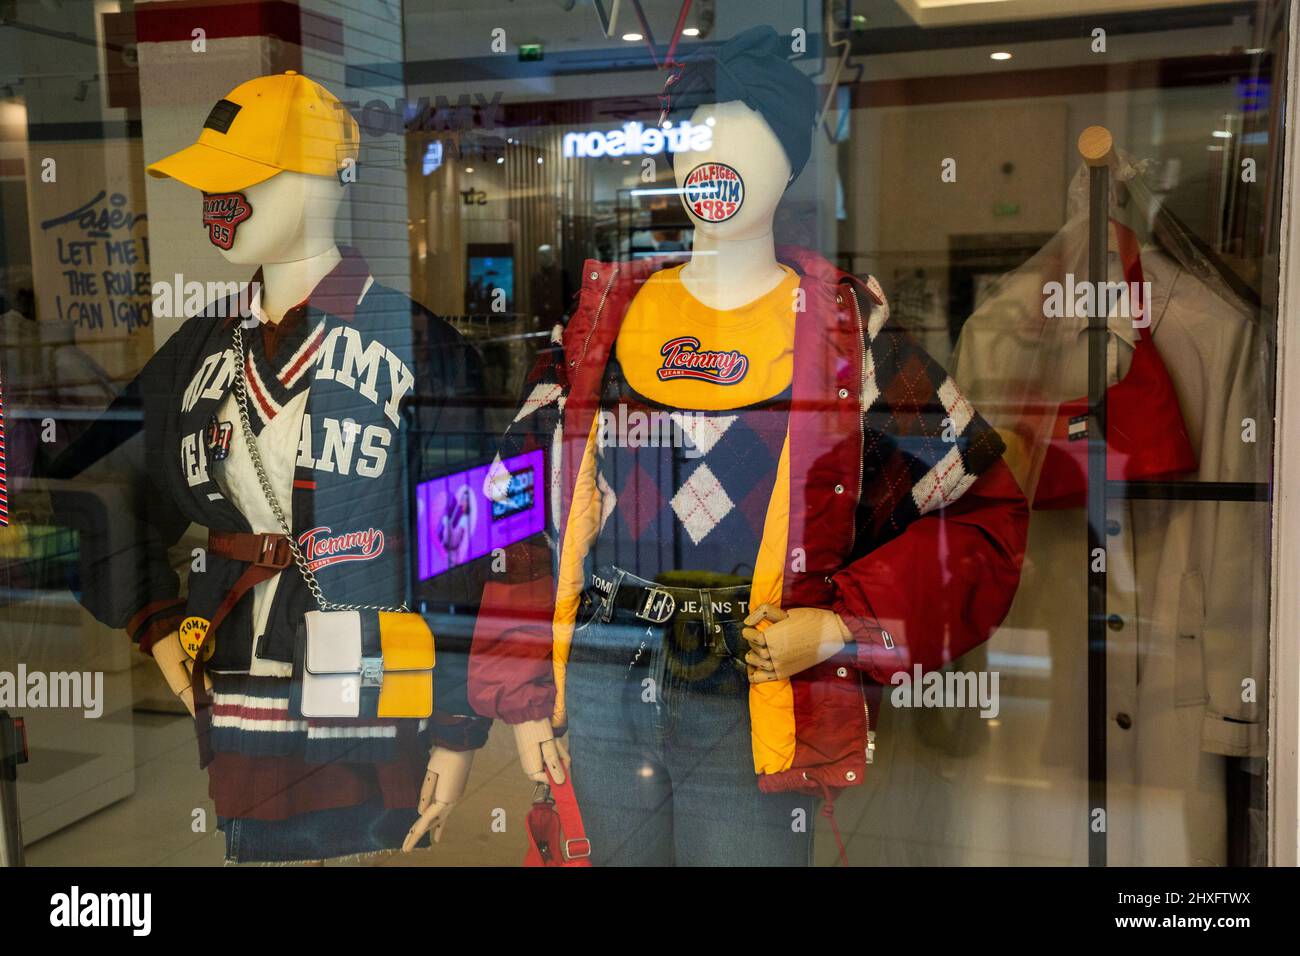 Tommy Hilfiger Brand High Resolution Stock Photography and Images - Alamy